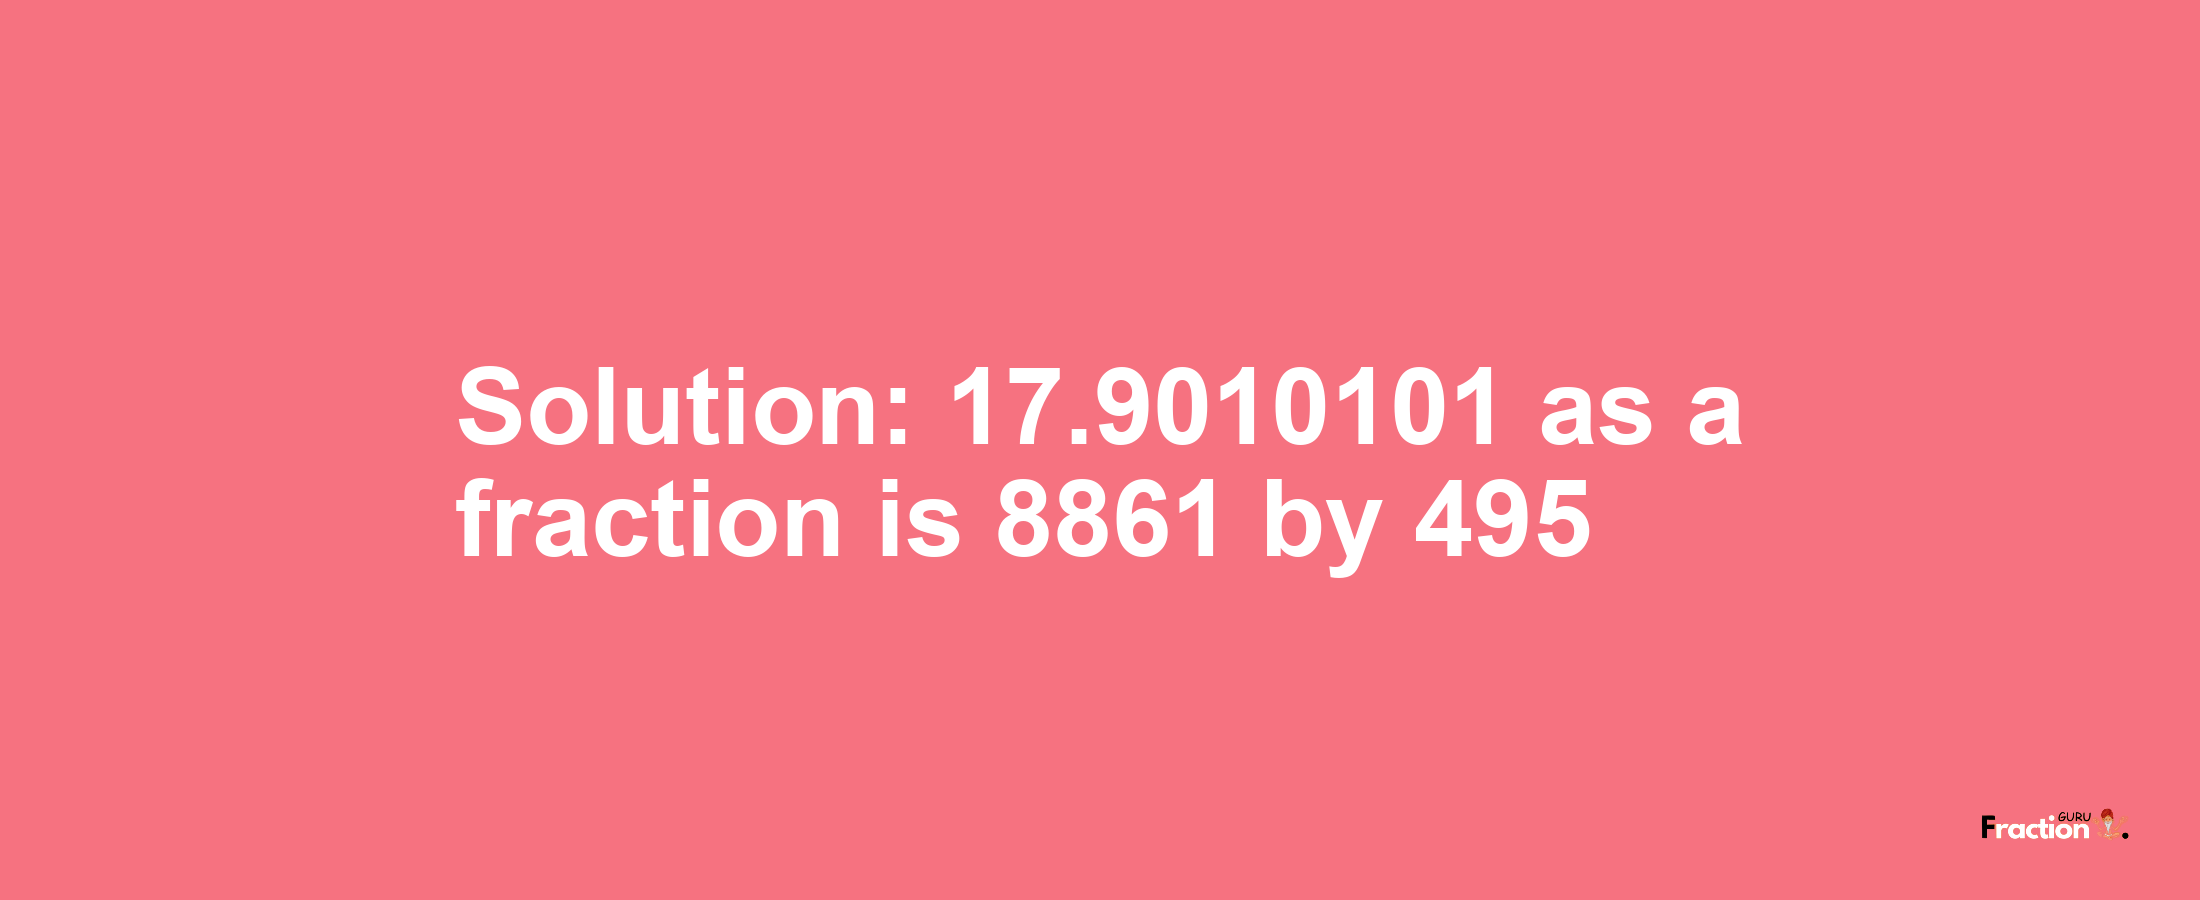 Solution:17.9010101 as a fraction is 8861/495